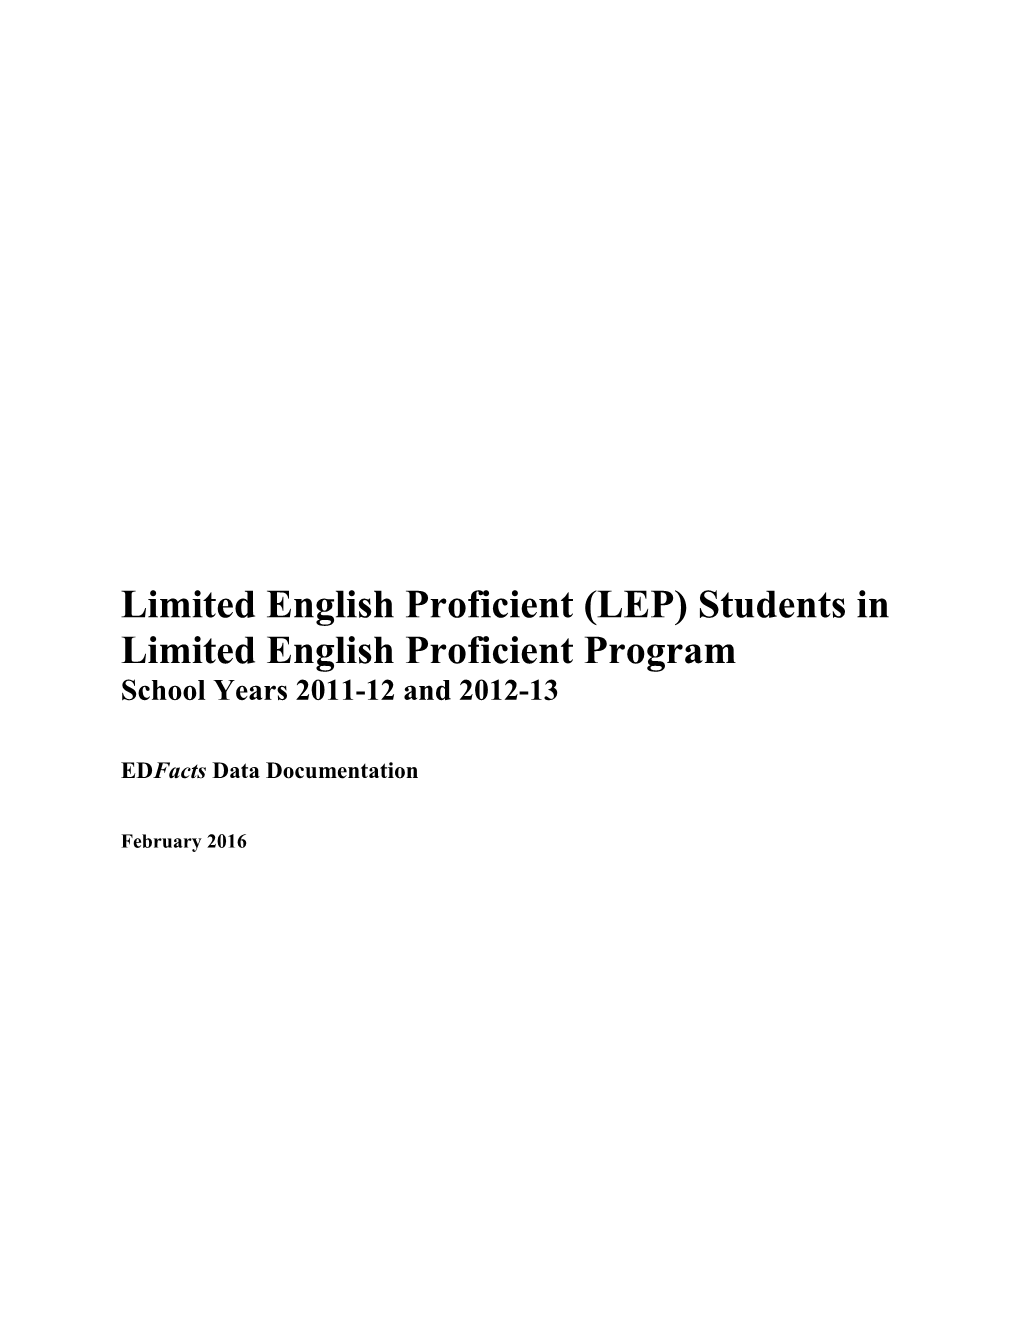 Limited English Proficient (LEP) Students in Limited English Proficient Program